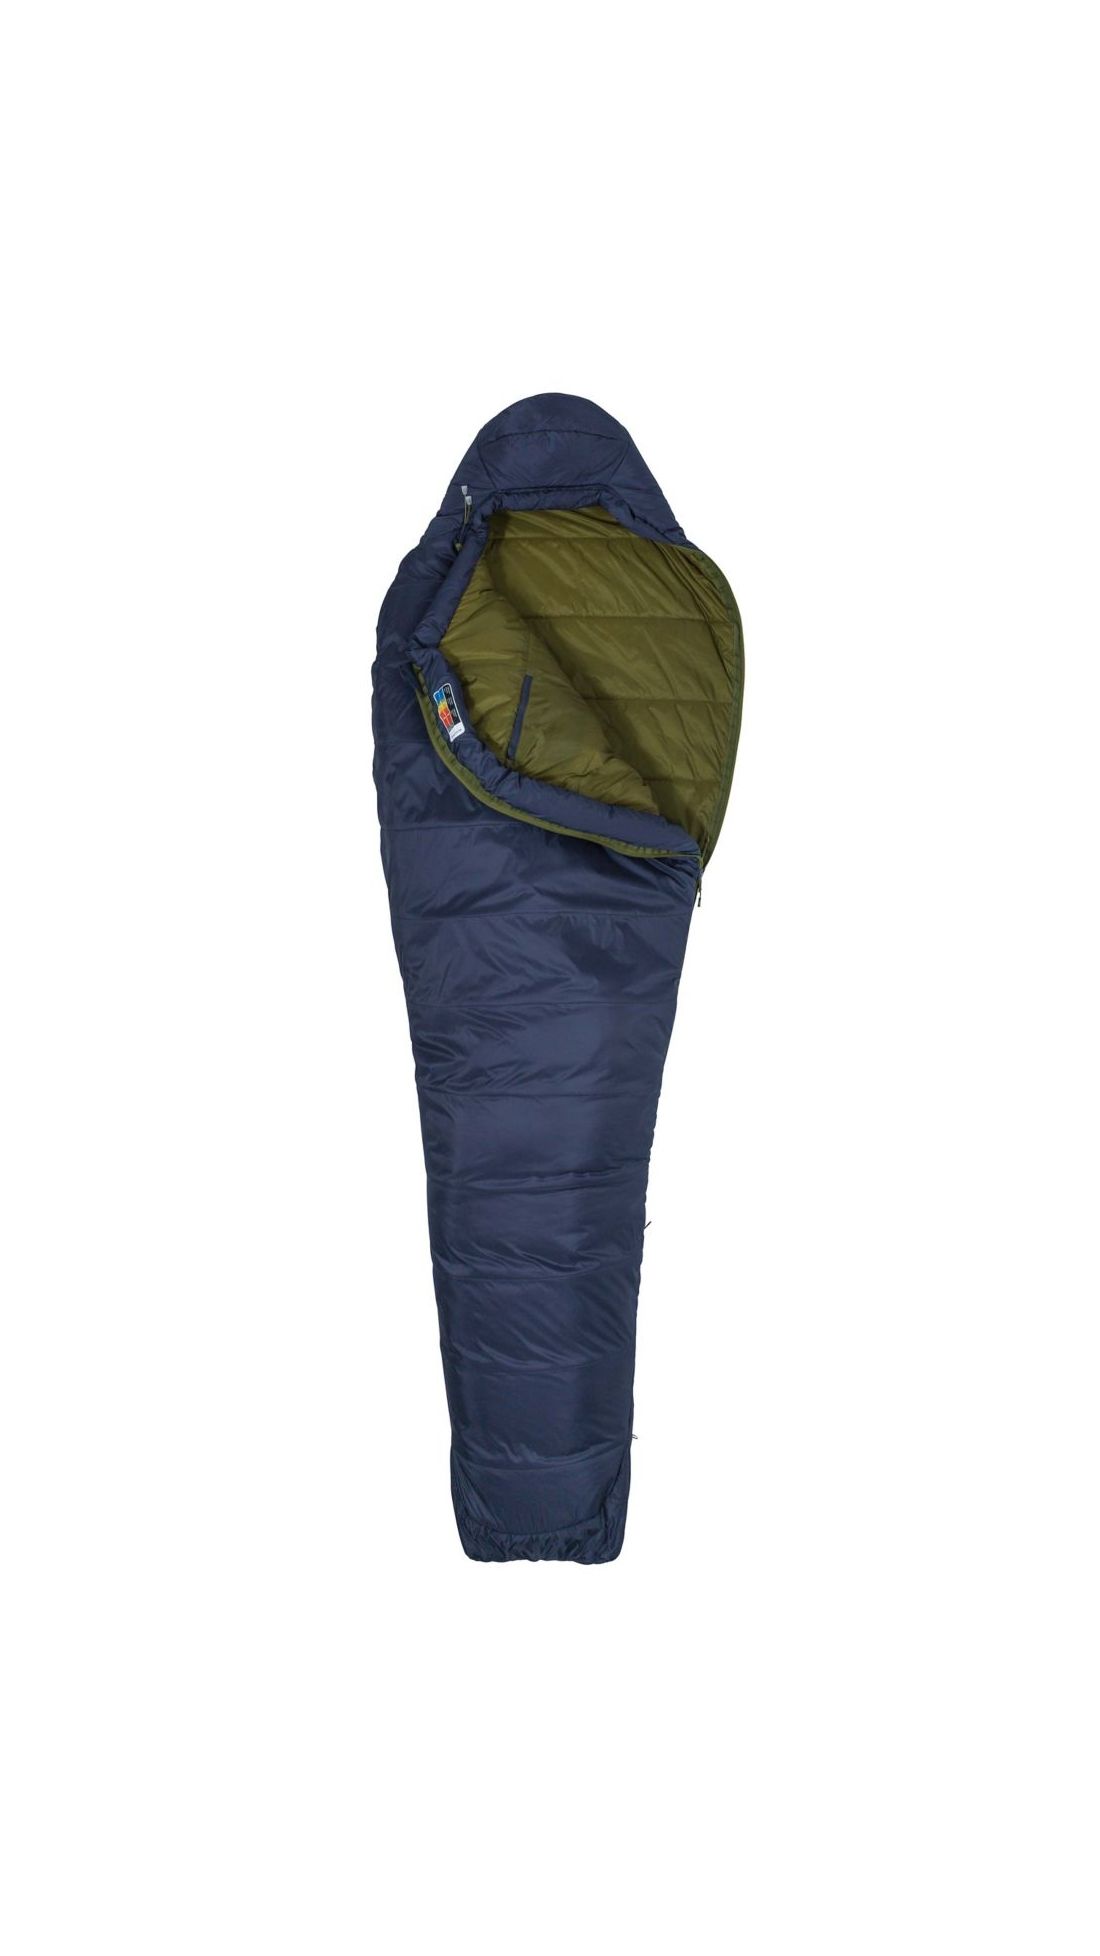 Marmot Ultra Elite Sleeping Bag | Up to 35% Off 5 Star Rating w/ Free Shipping